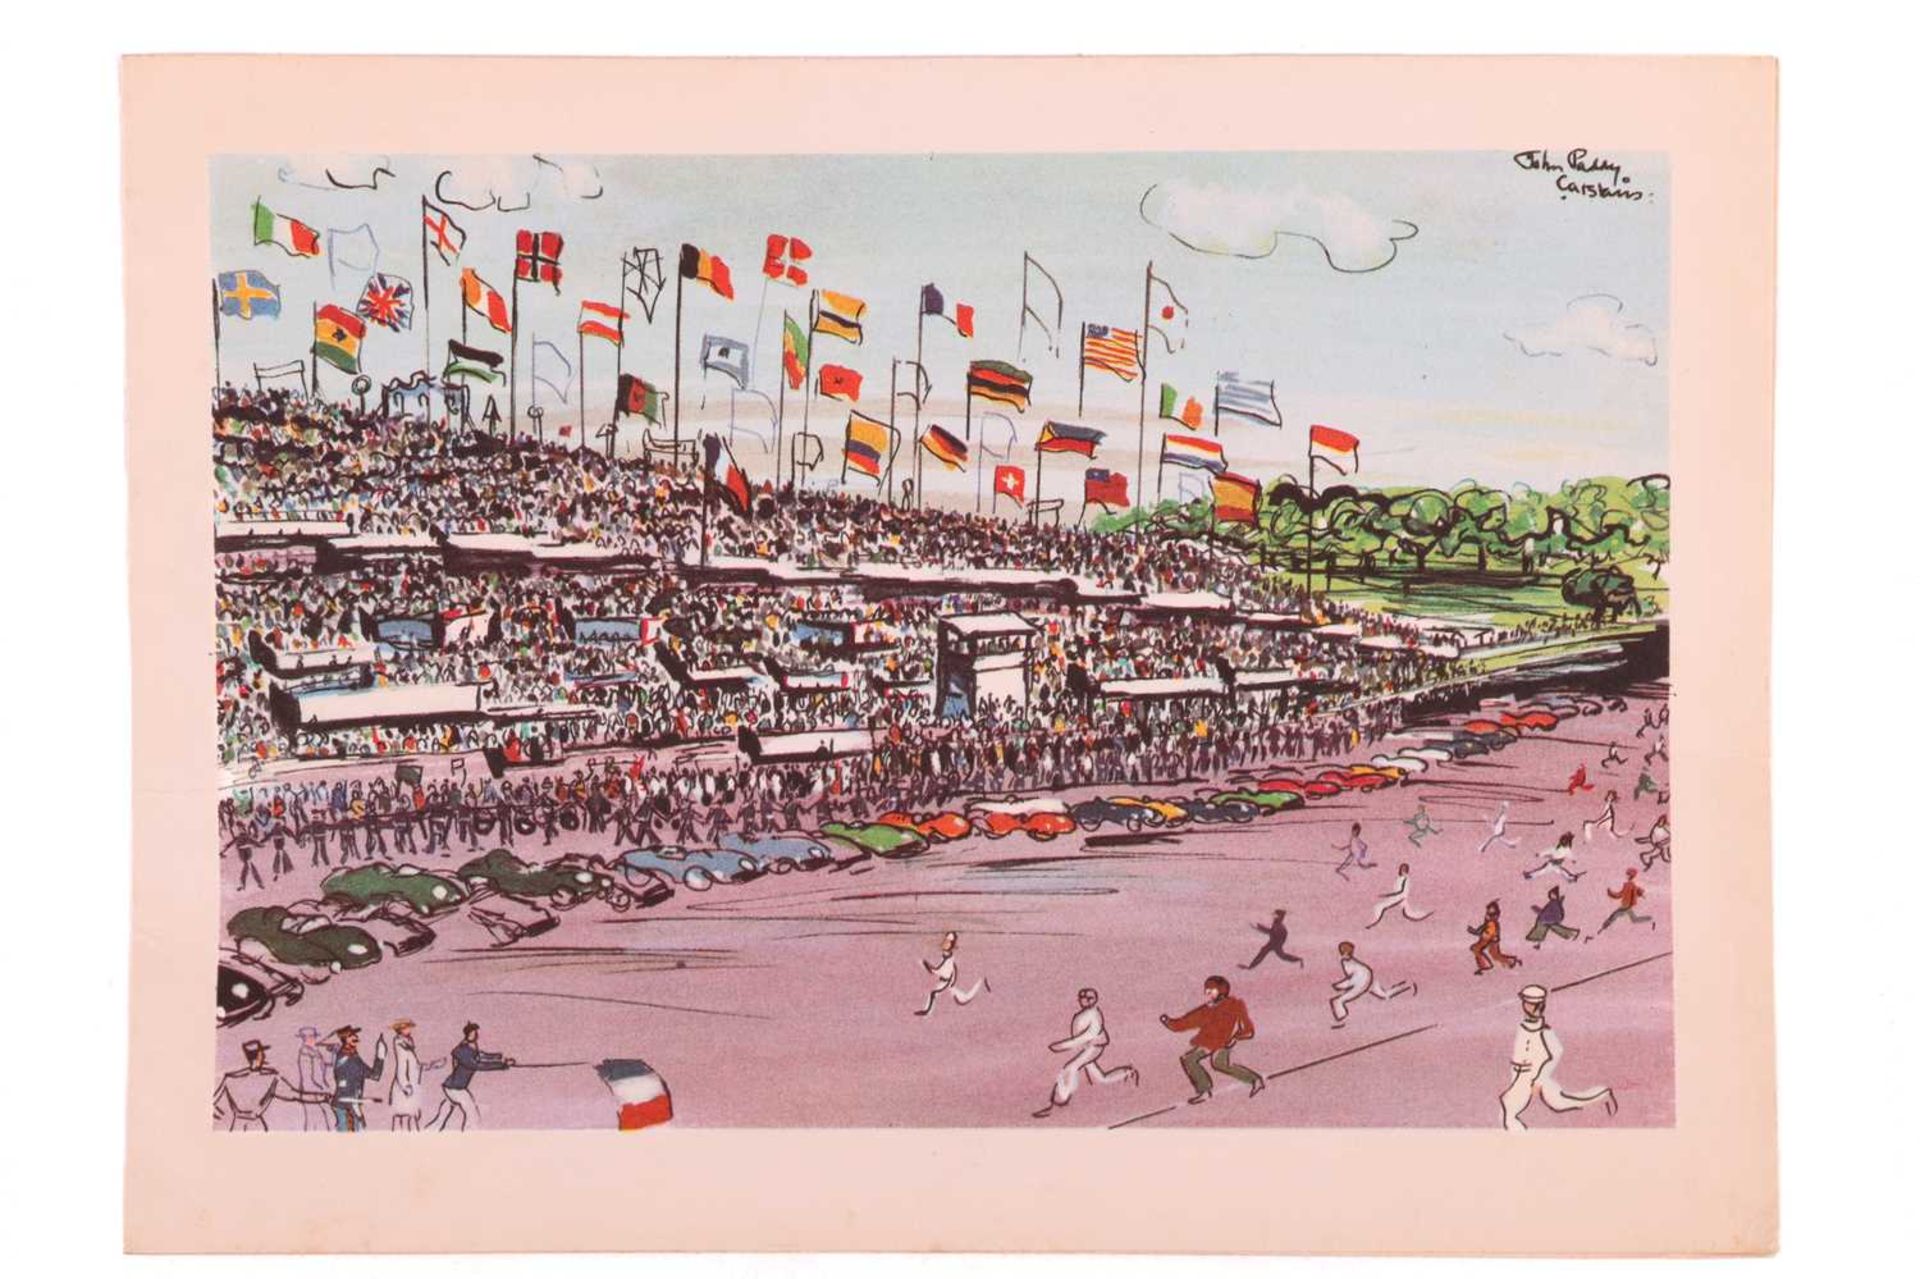 John Paddy Carstairs (1916 - 1970), 'Le Mans - The Start of the Race', signed 'John Paddy Carstairs' - Image 6 of 10